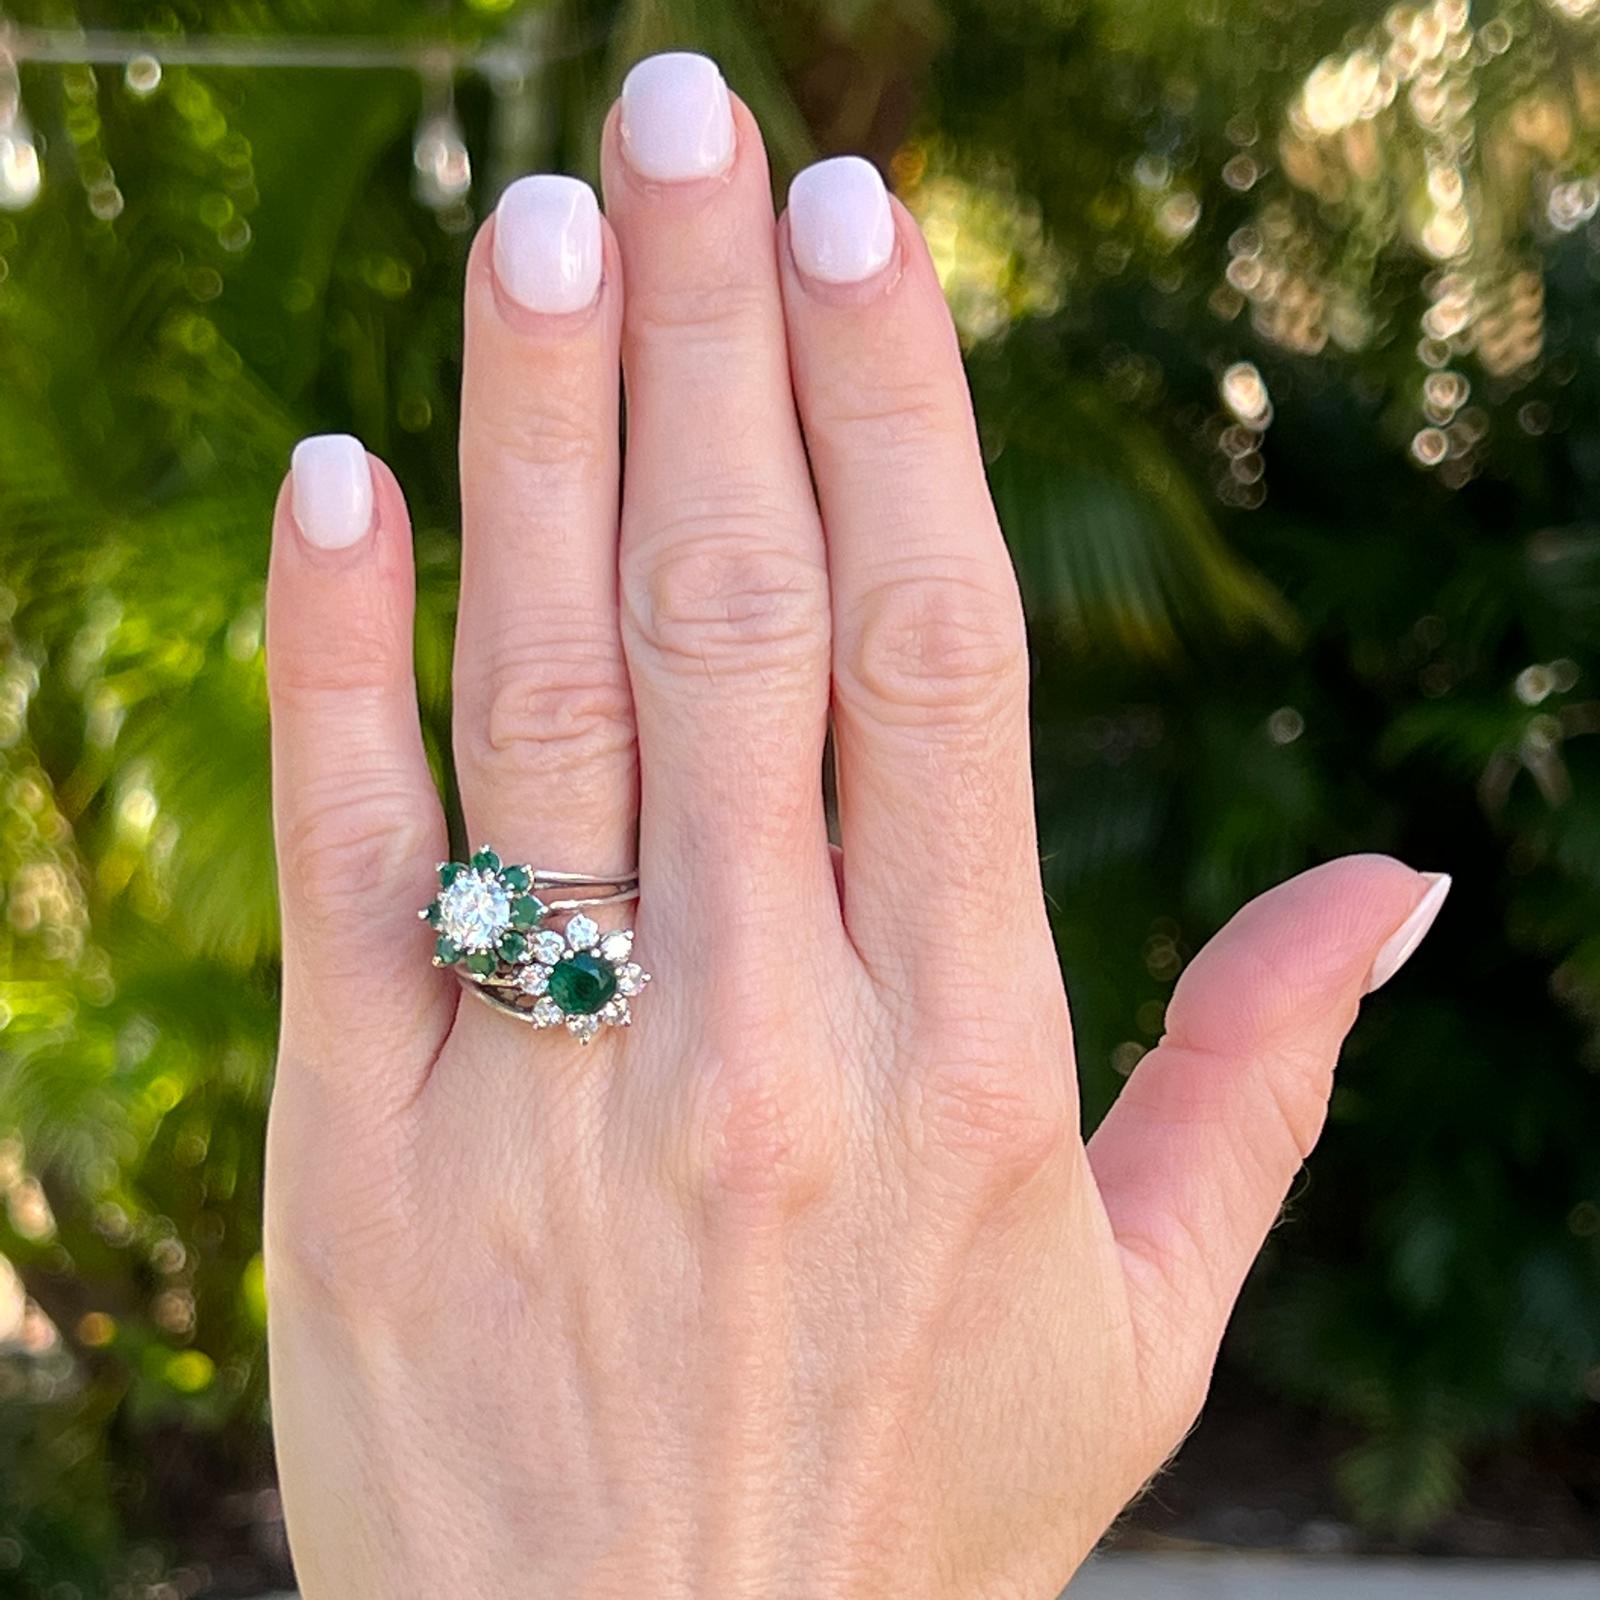 Beautiful and unique vintage diamond emerald bypass ring handcrafted in 18 karat white gold. The ring features an approximately .90 carat round brilliant cut diamond and an approximately 1.25 carat round cut emerald that are set in the centers. The